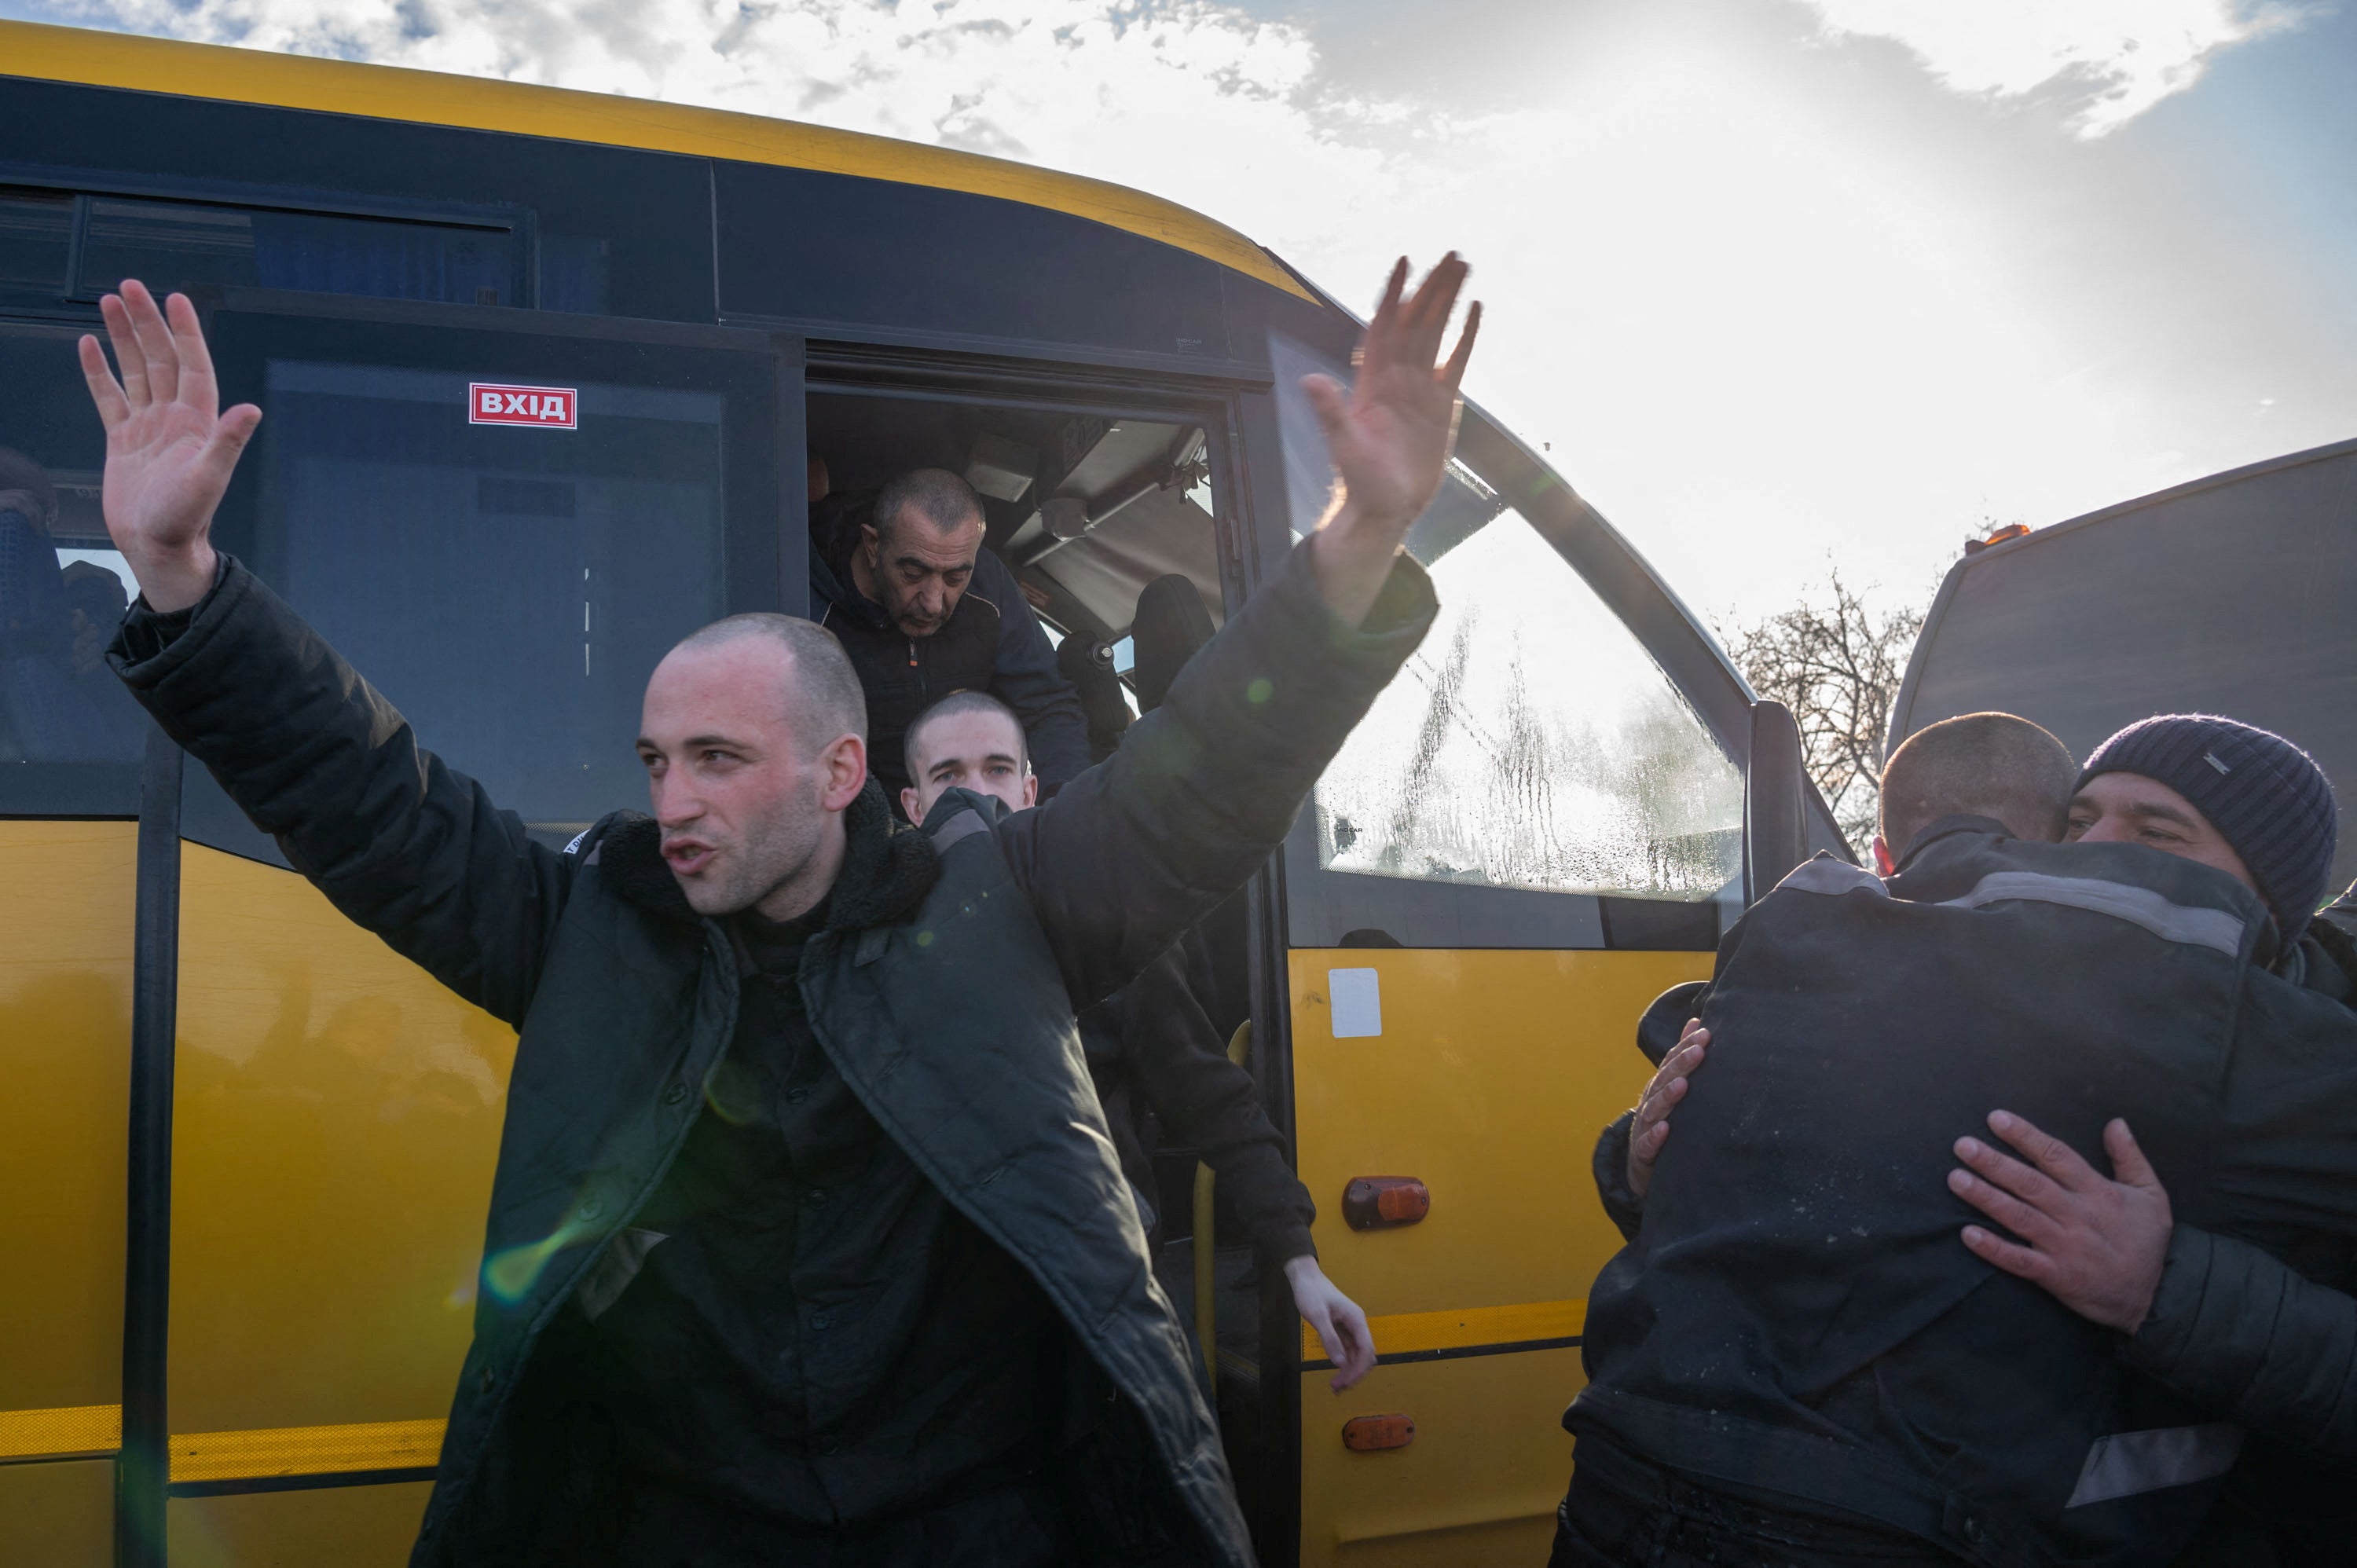 Ukrainian prisoners of war (POWs) react after a swap, amid Russia’s attack on Ukraine, at an unknown location in Ukraine